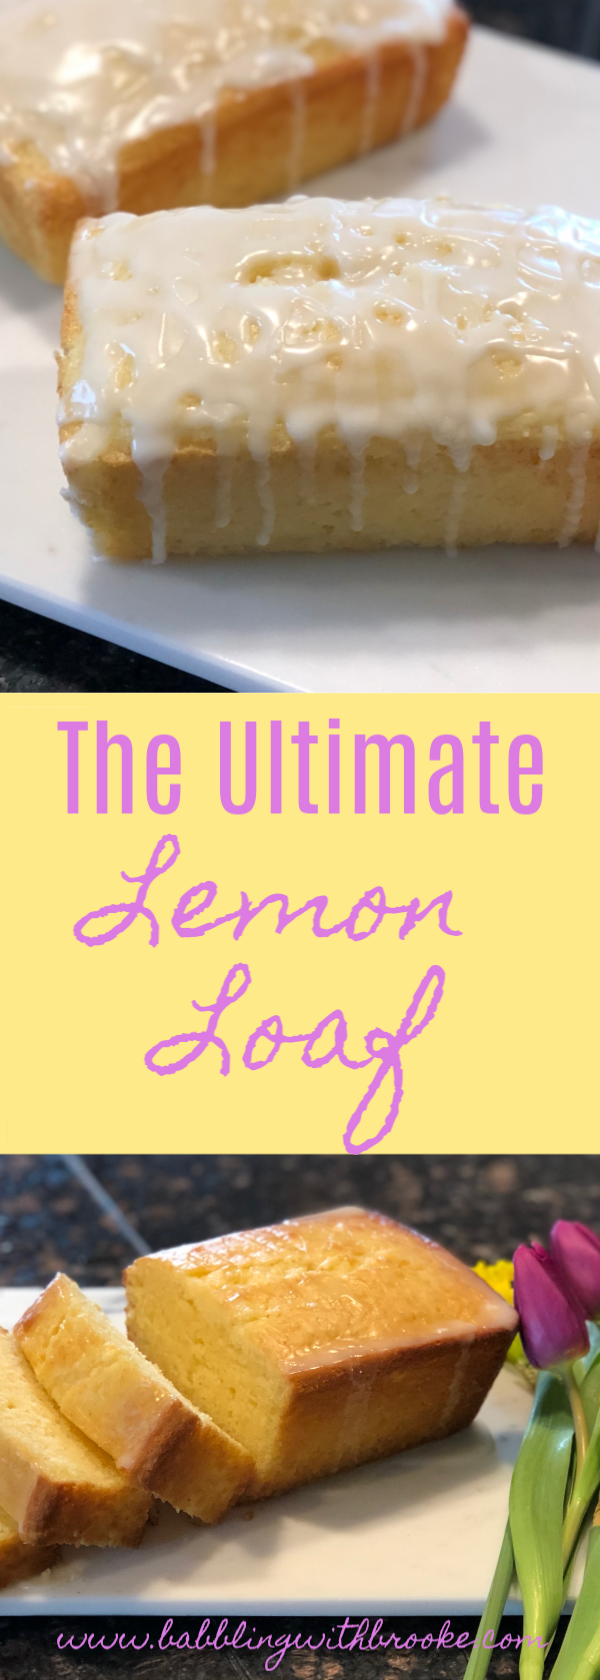 This lemon loaf is so oist and so easy to make that you will regret having not found it sooner! It is high altitude compatible and will be loved by everyone. #lemonloaf #highaltitudebaking #highaltitudelemonloafrecipe #lemonloafrecipe #moistlemonloaf #brunchrecipe #easysweetbreakfastrecipe